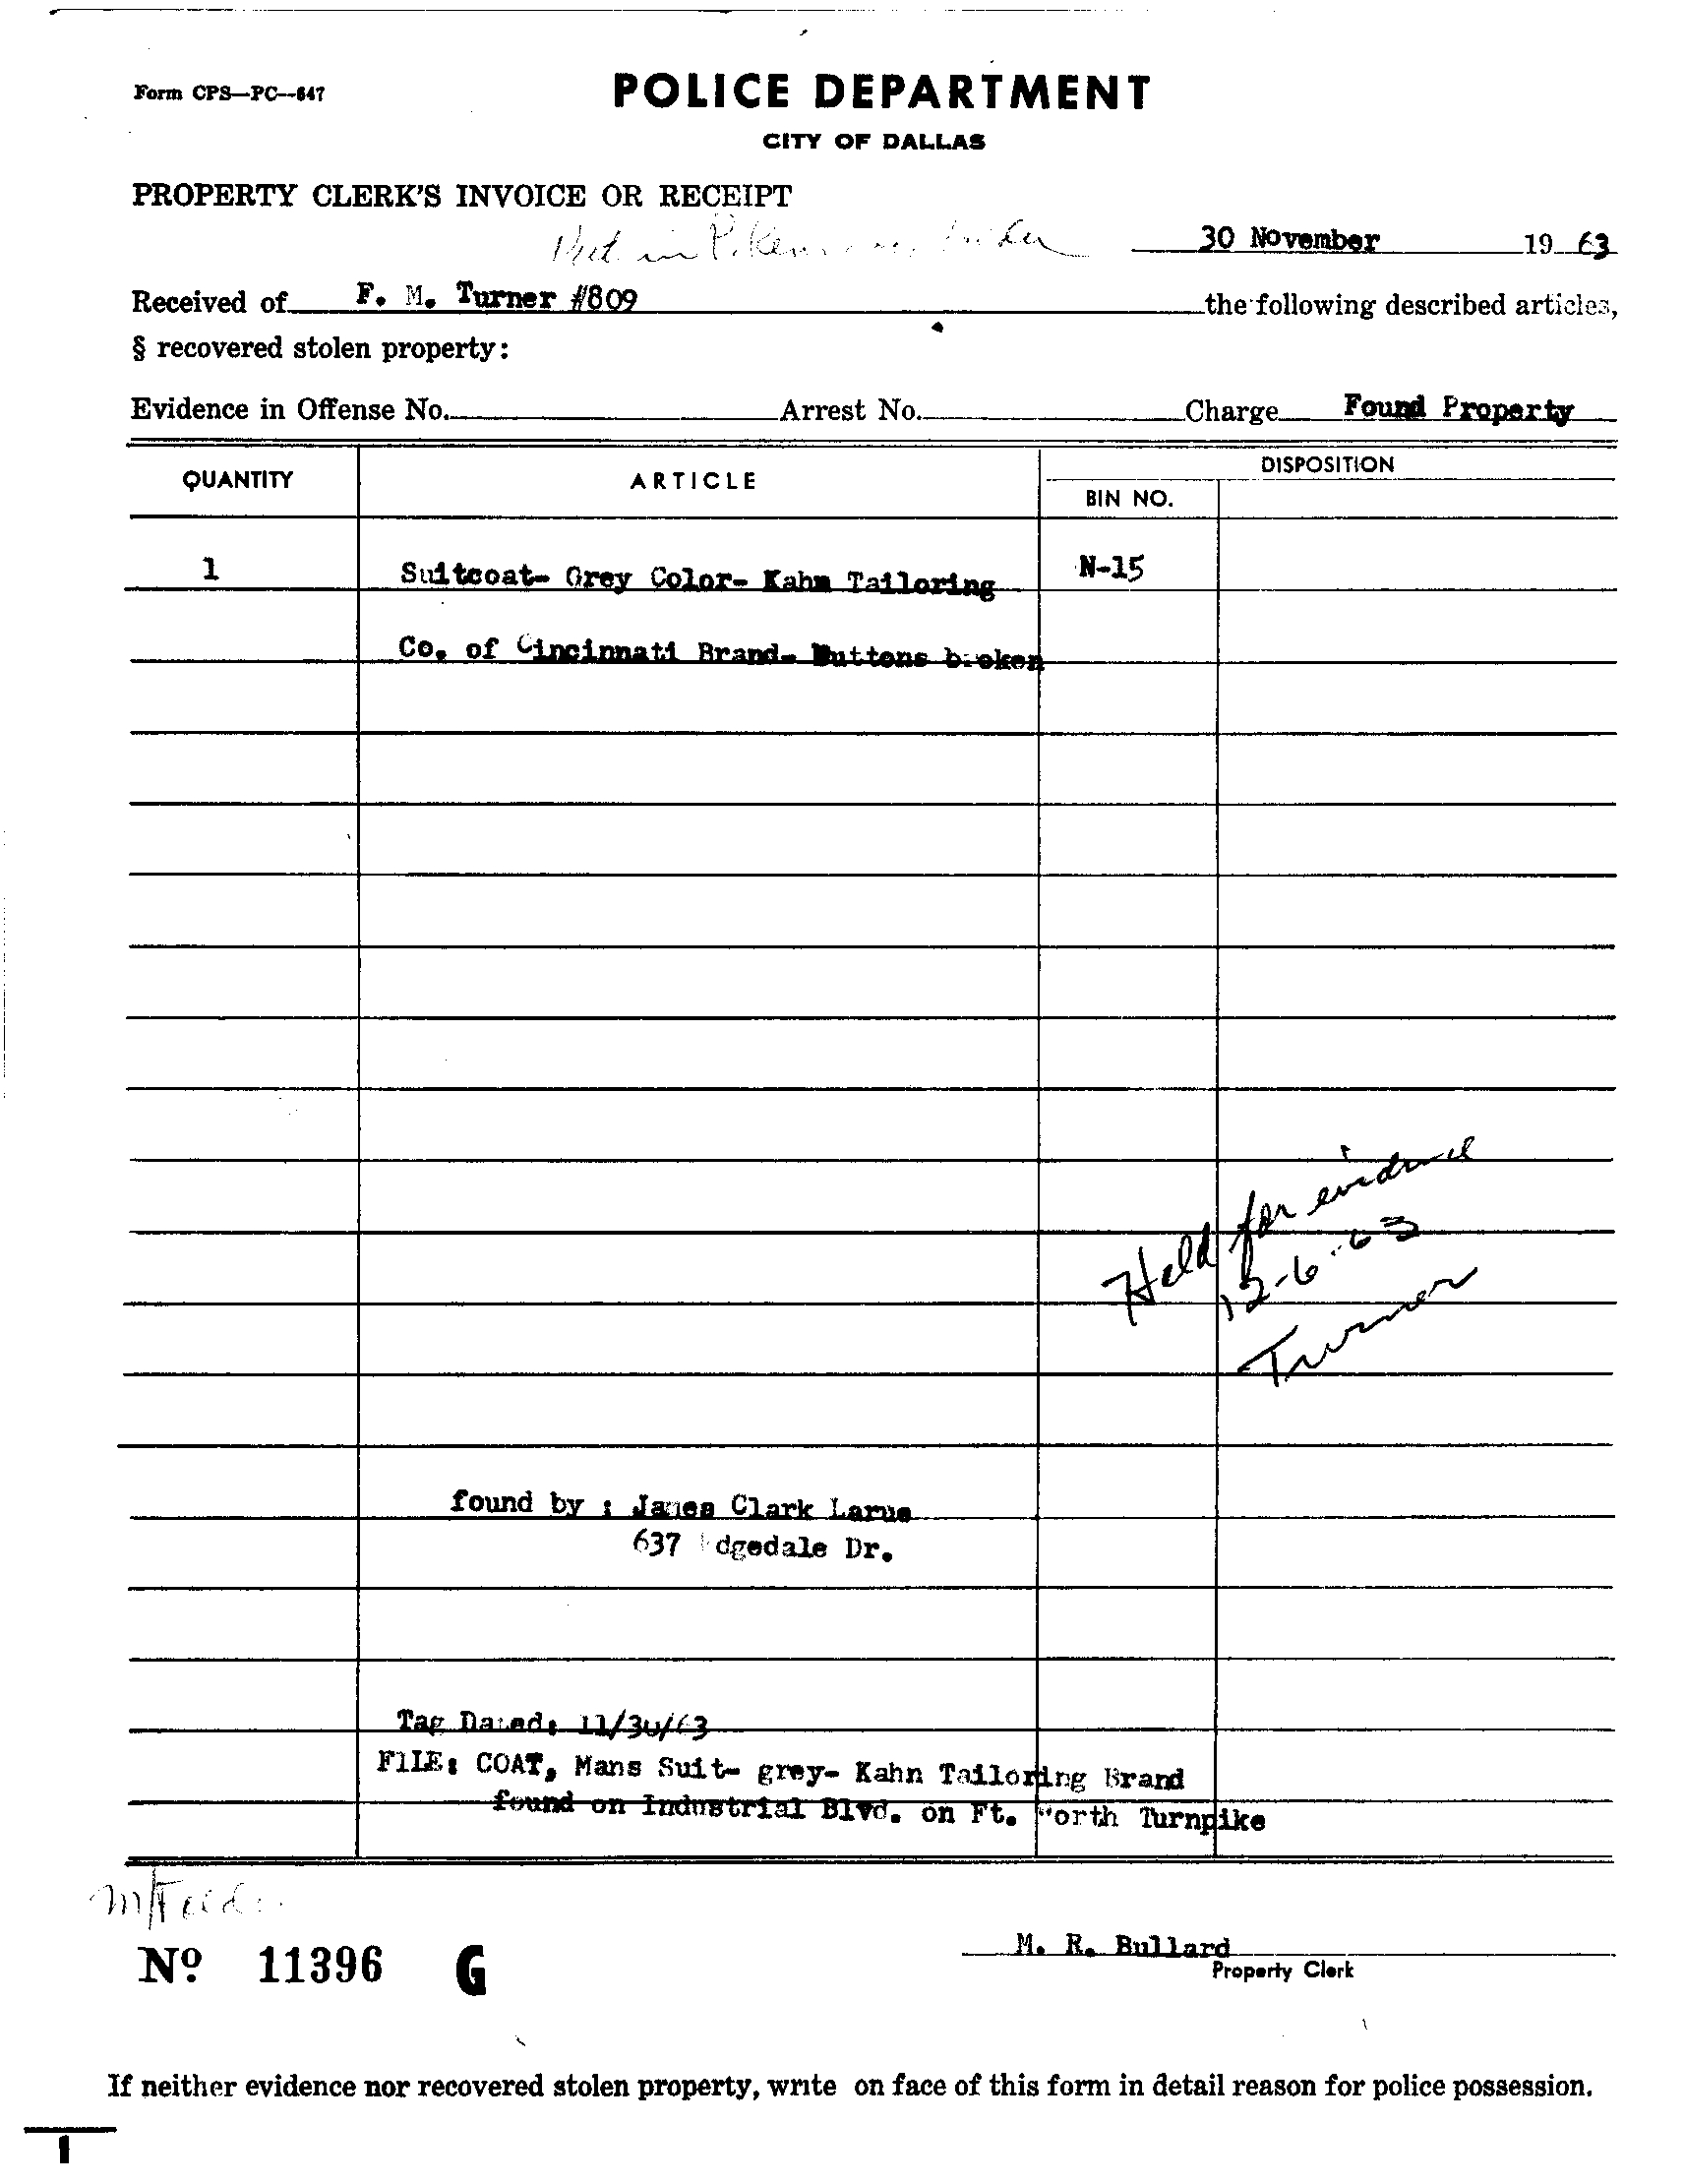 guide to the city of dallas archives carbon copy invoices